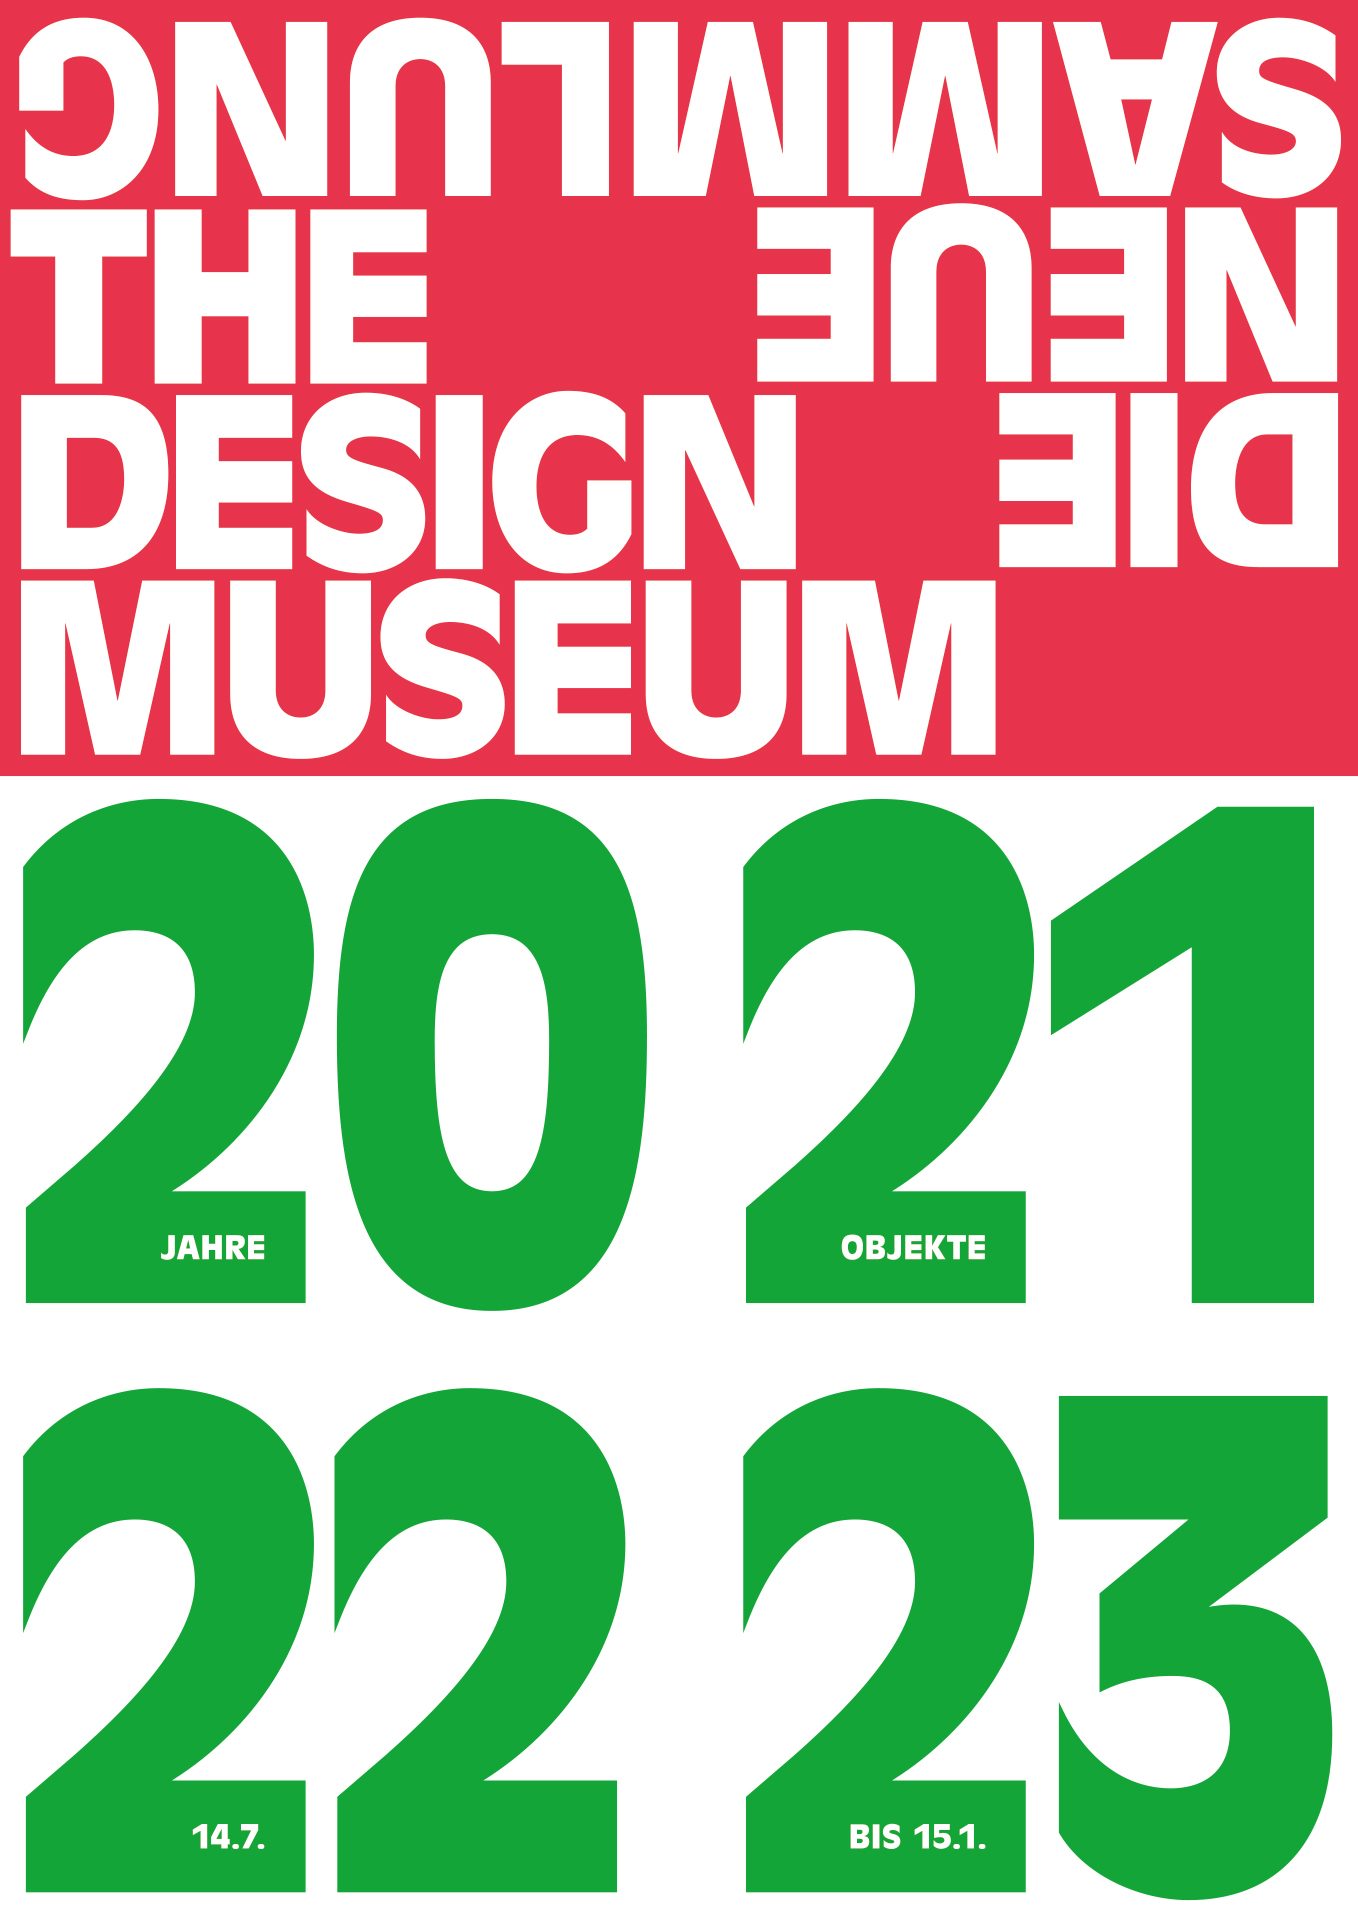 The red logo of Die Neue Sammlung. Below are years (2021 and 2023) in green with embedded text (years, objects, 14.7.7, Bis 15.1.